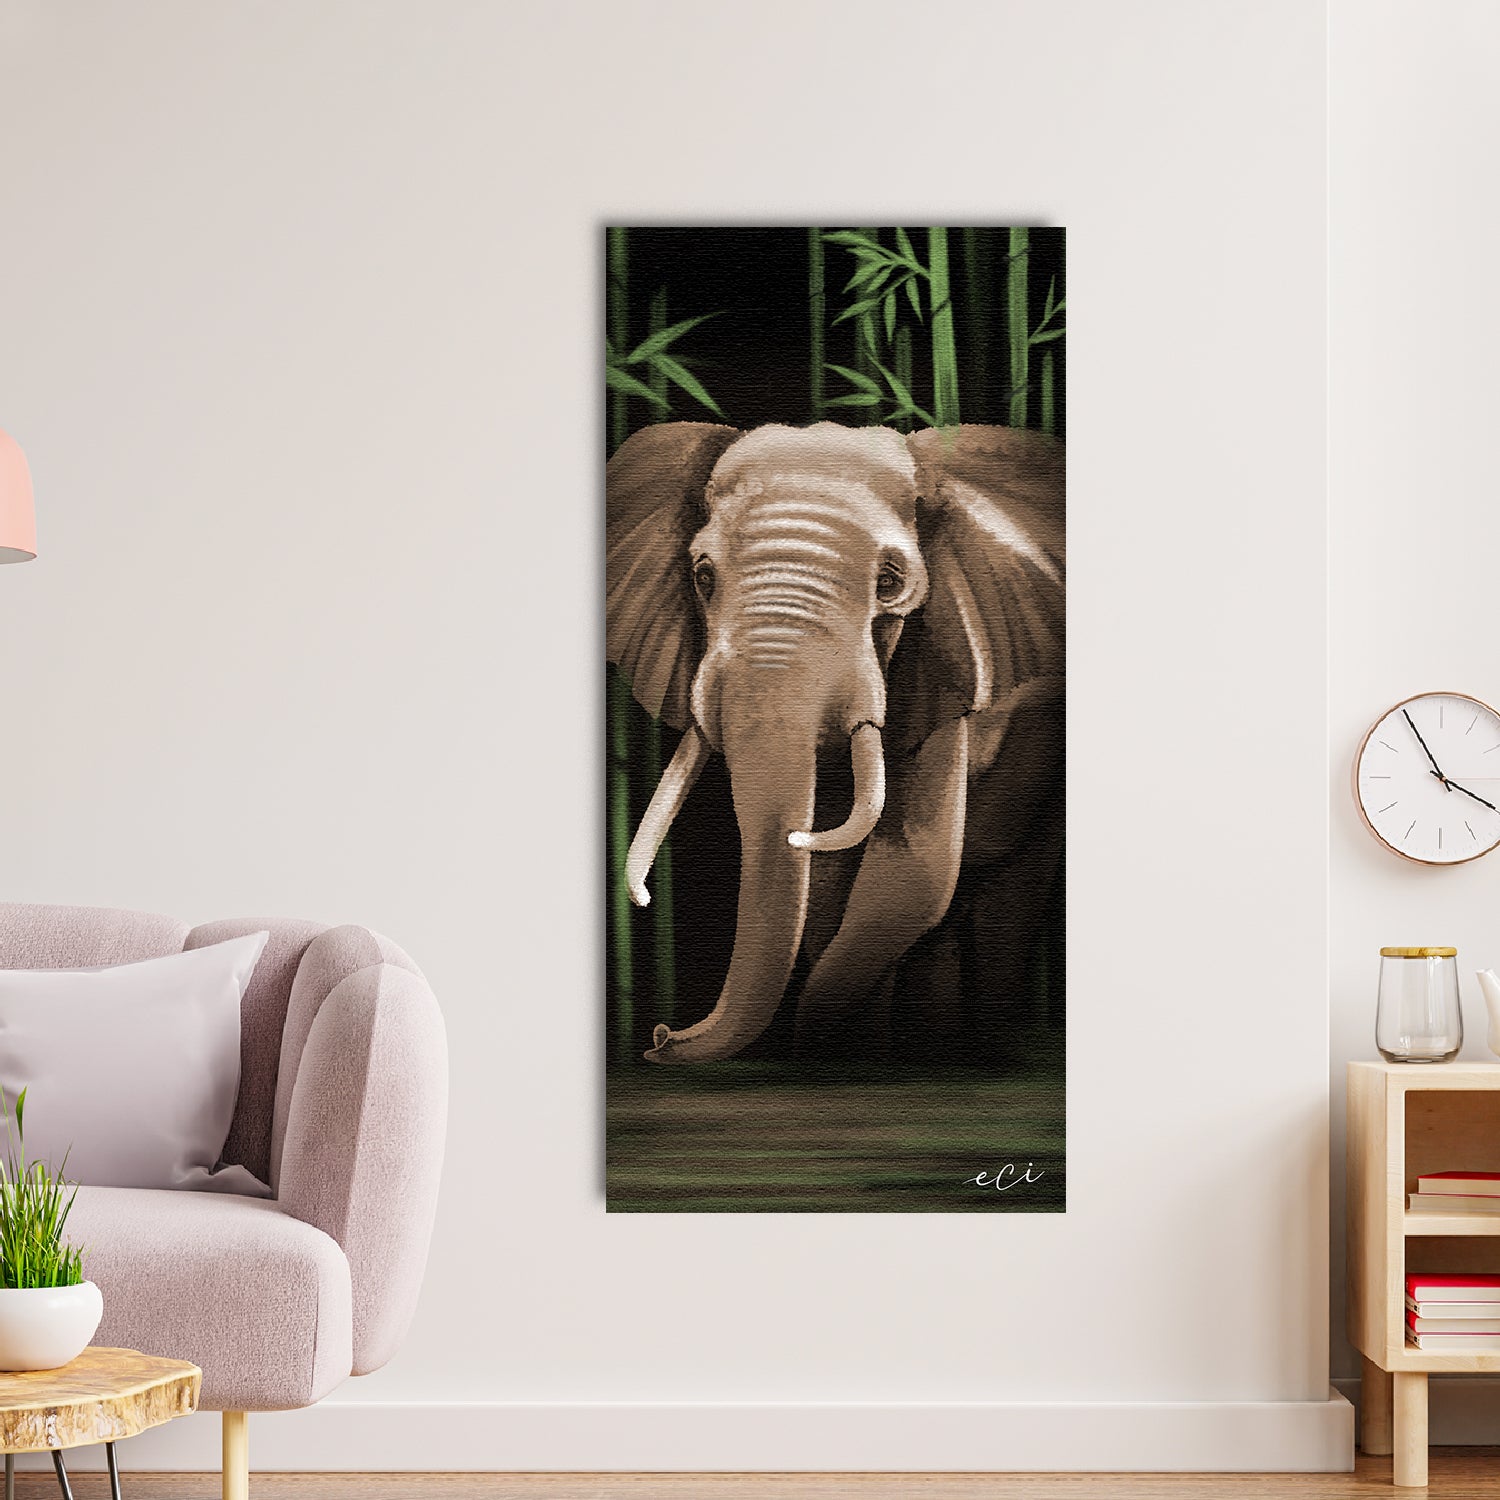 Elephant Walking In A Forest Canvas Painting Digital Printed Animal Wall Art 1